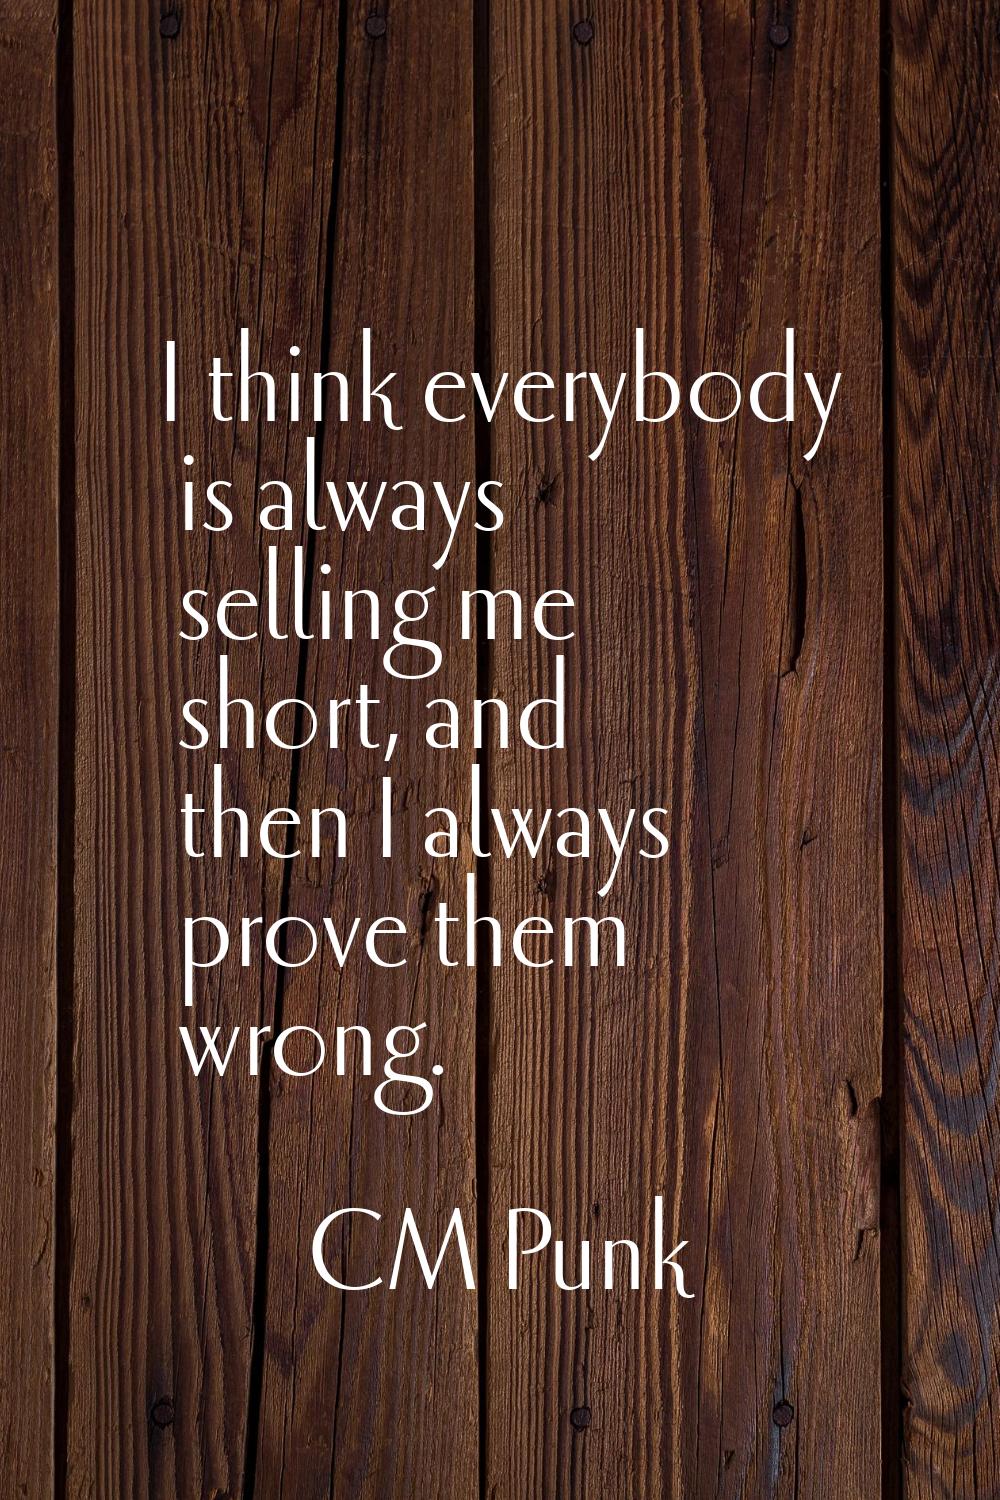 I think everybody is always selling me short, and then I always prove them wrong.